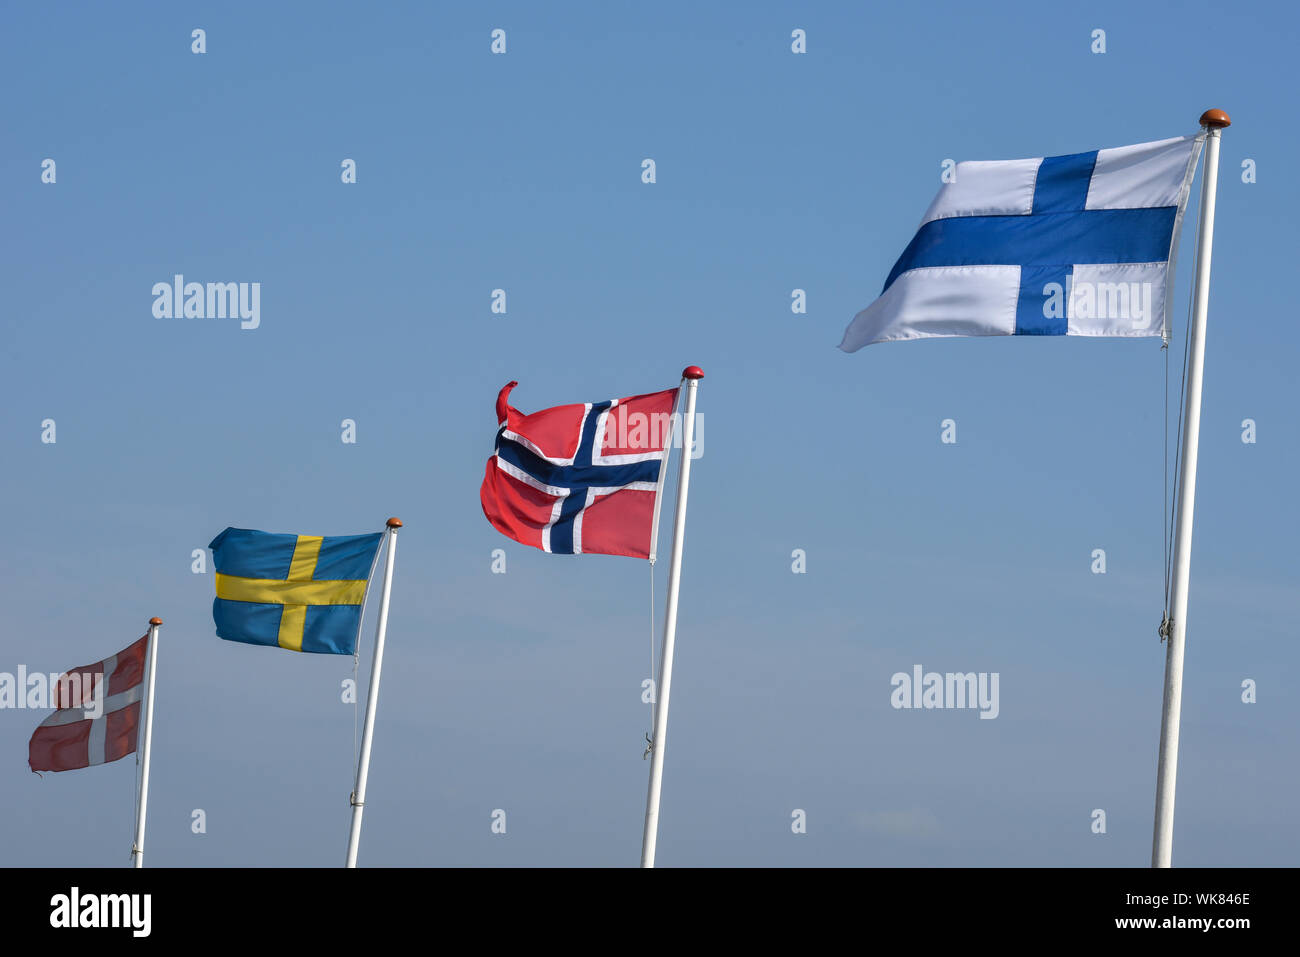 Flags Of Which Countries Feature A Cross In Their Design? - WorldAtlas